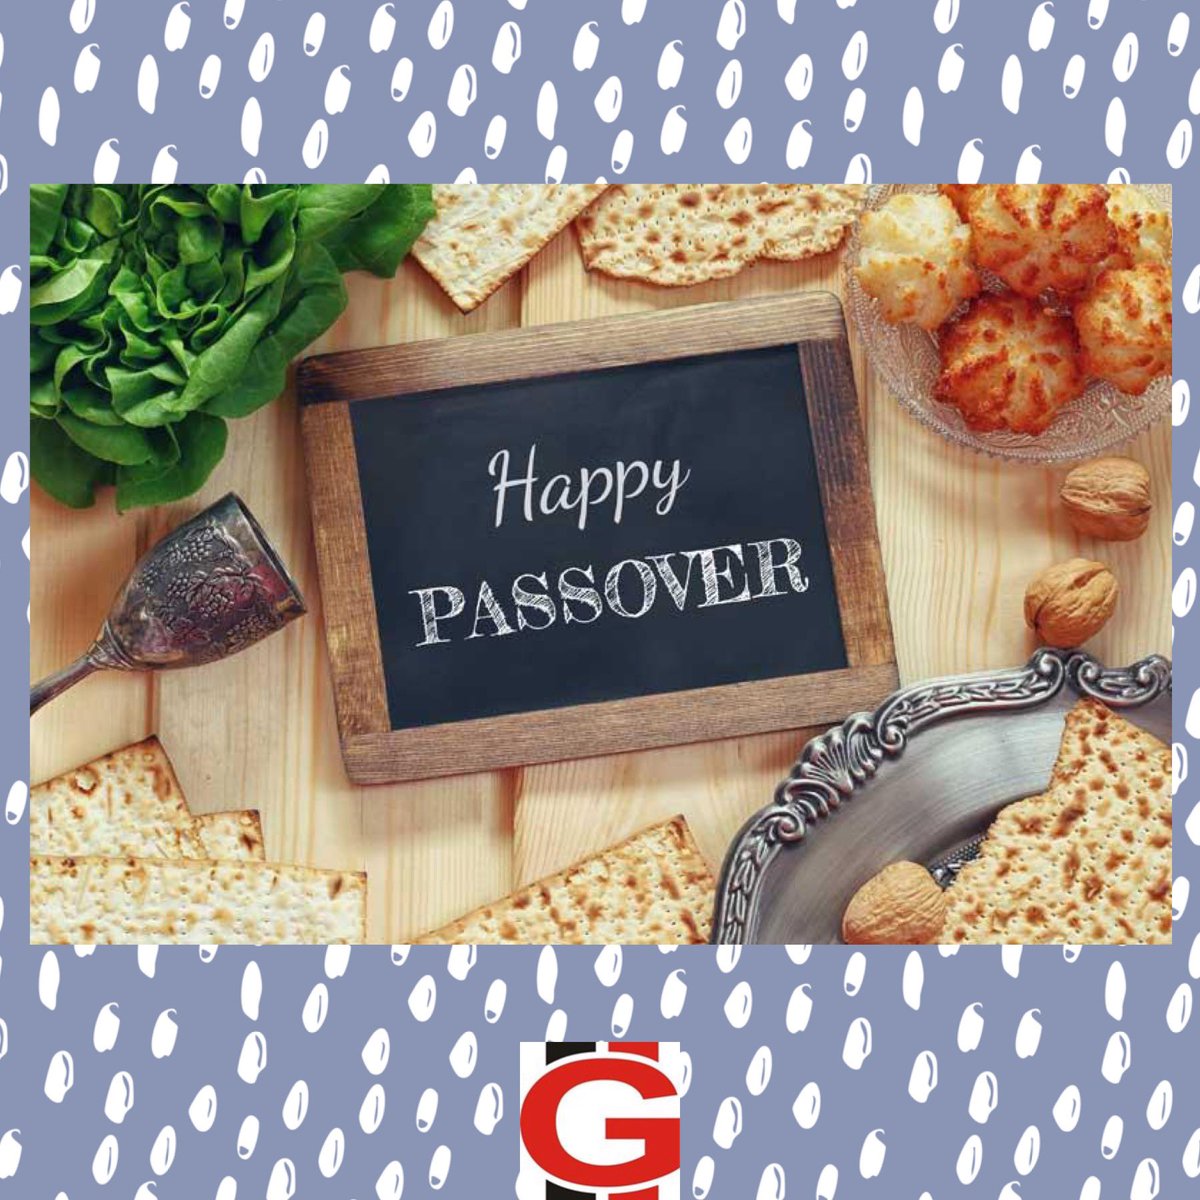 Wishing a Happy Passover to all our friends and families who celebrate! 
#happypassover #georgiaautogroup